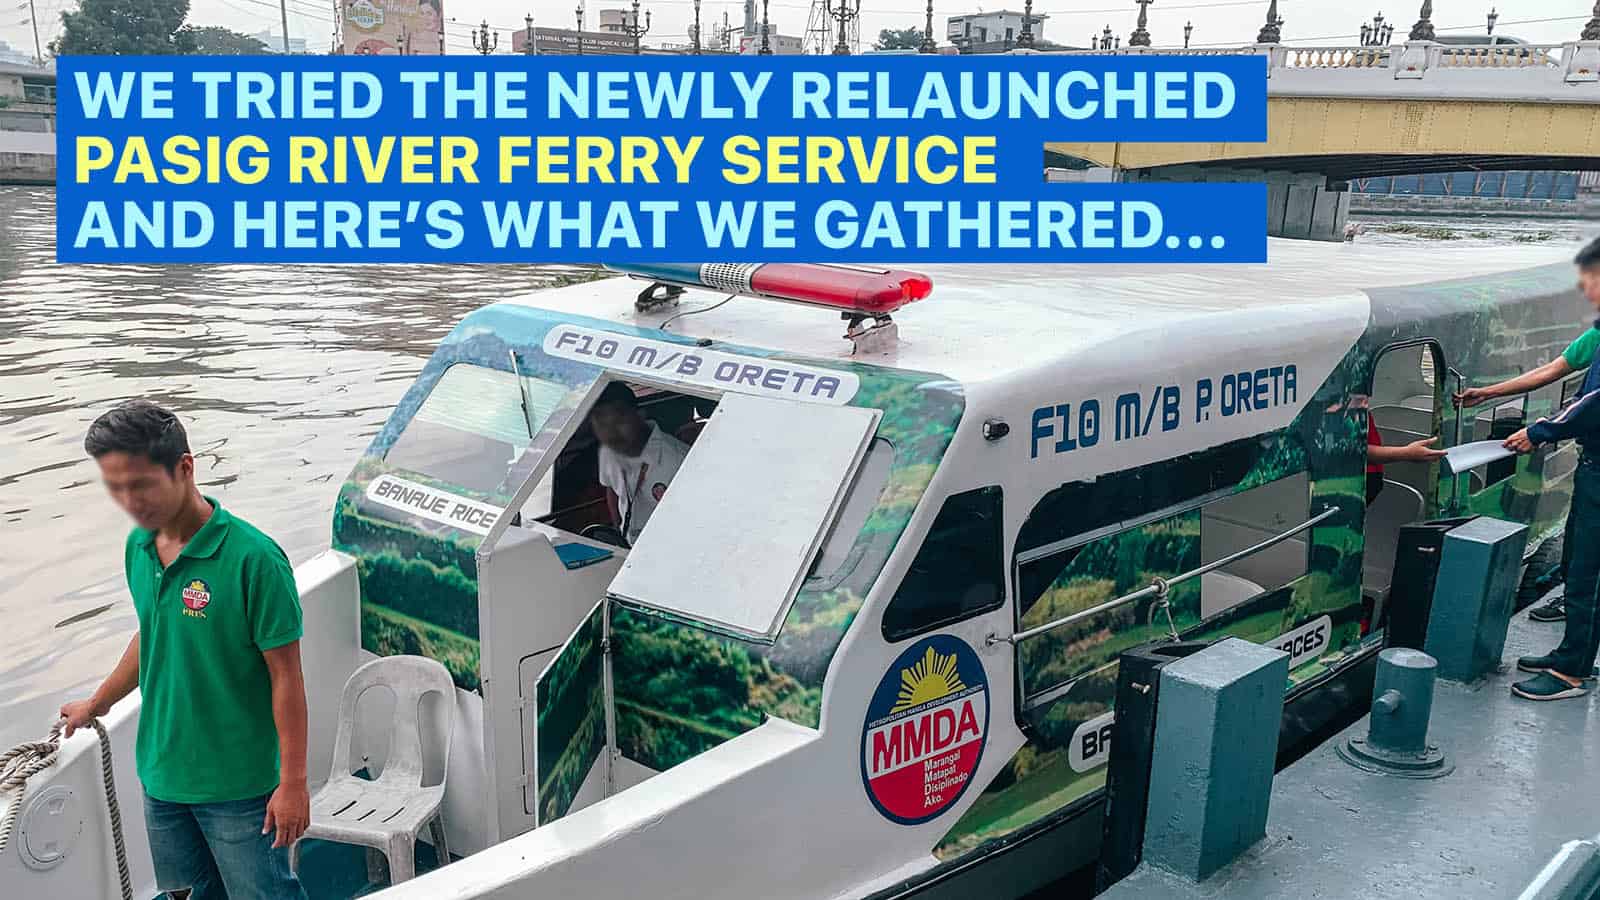 FREE PASIG RIVER FERRY: Stations, Schedule & Other Things You Need to Know